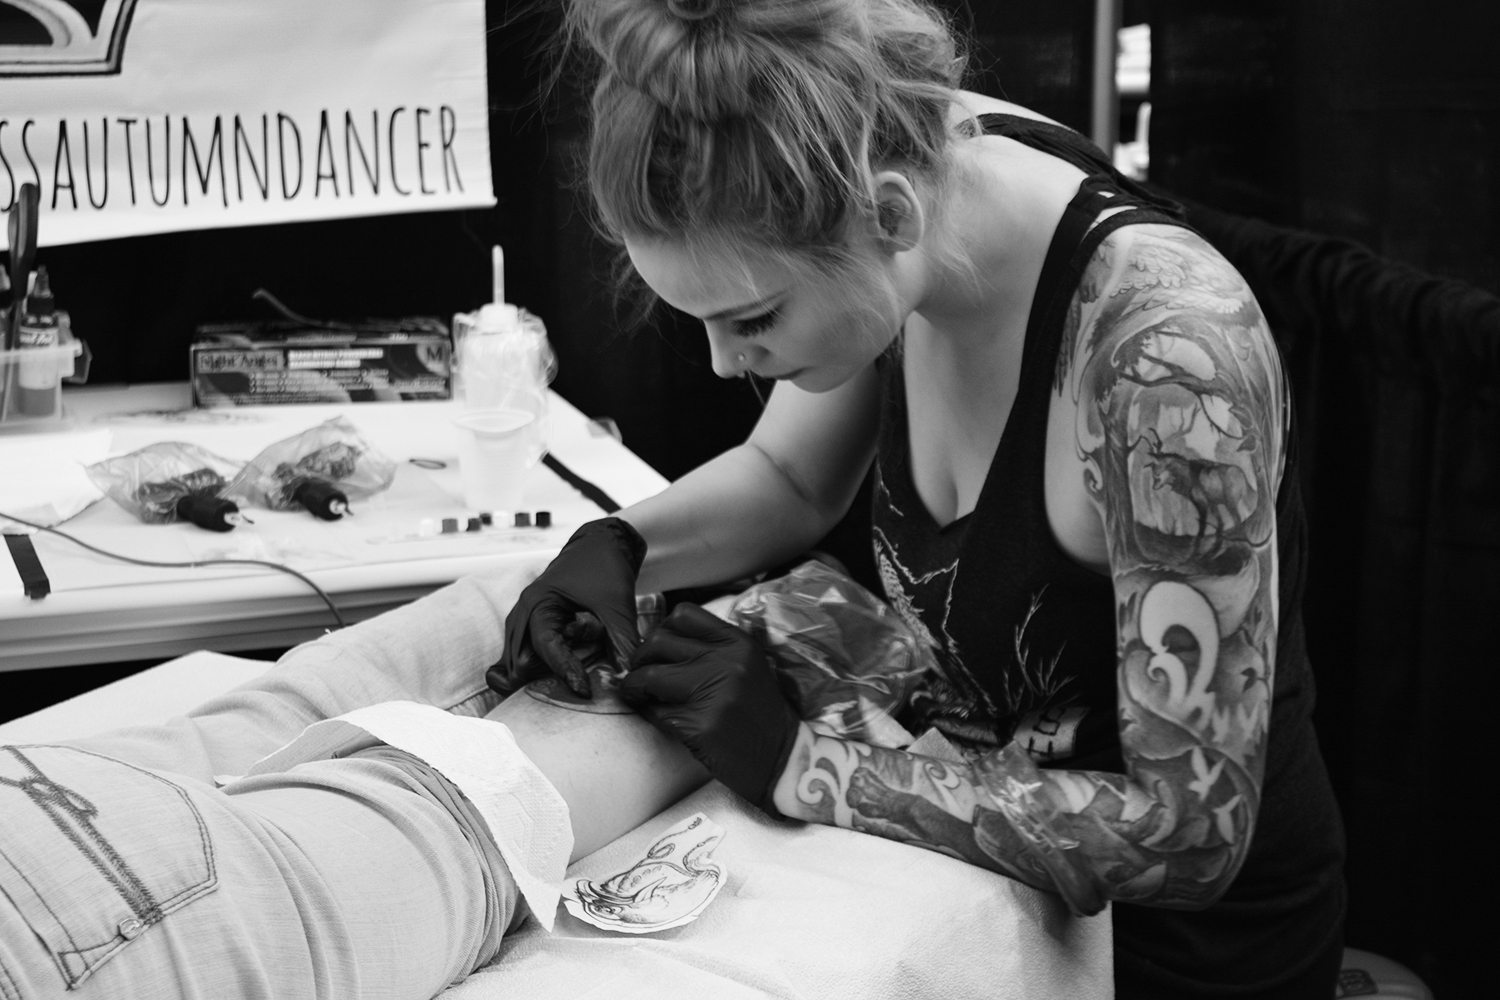 Autumn dancer tattooing client, at tattoo convention